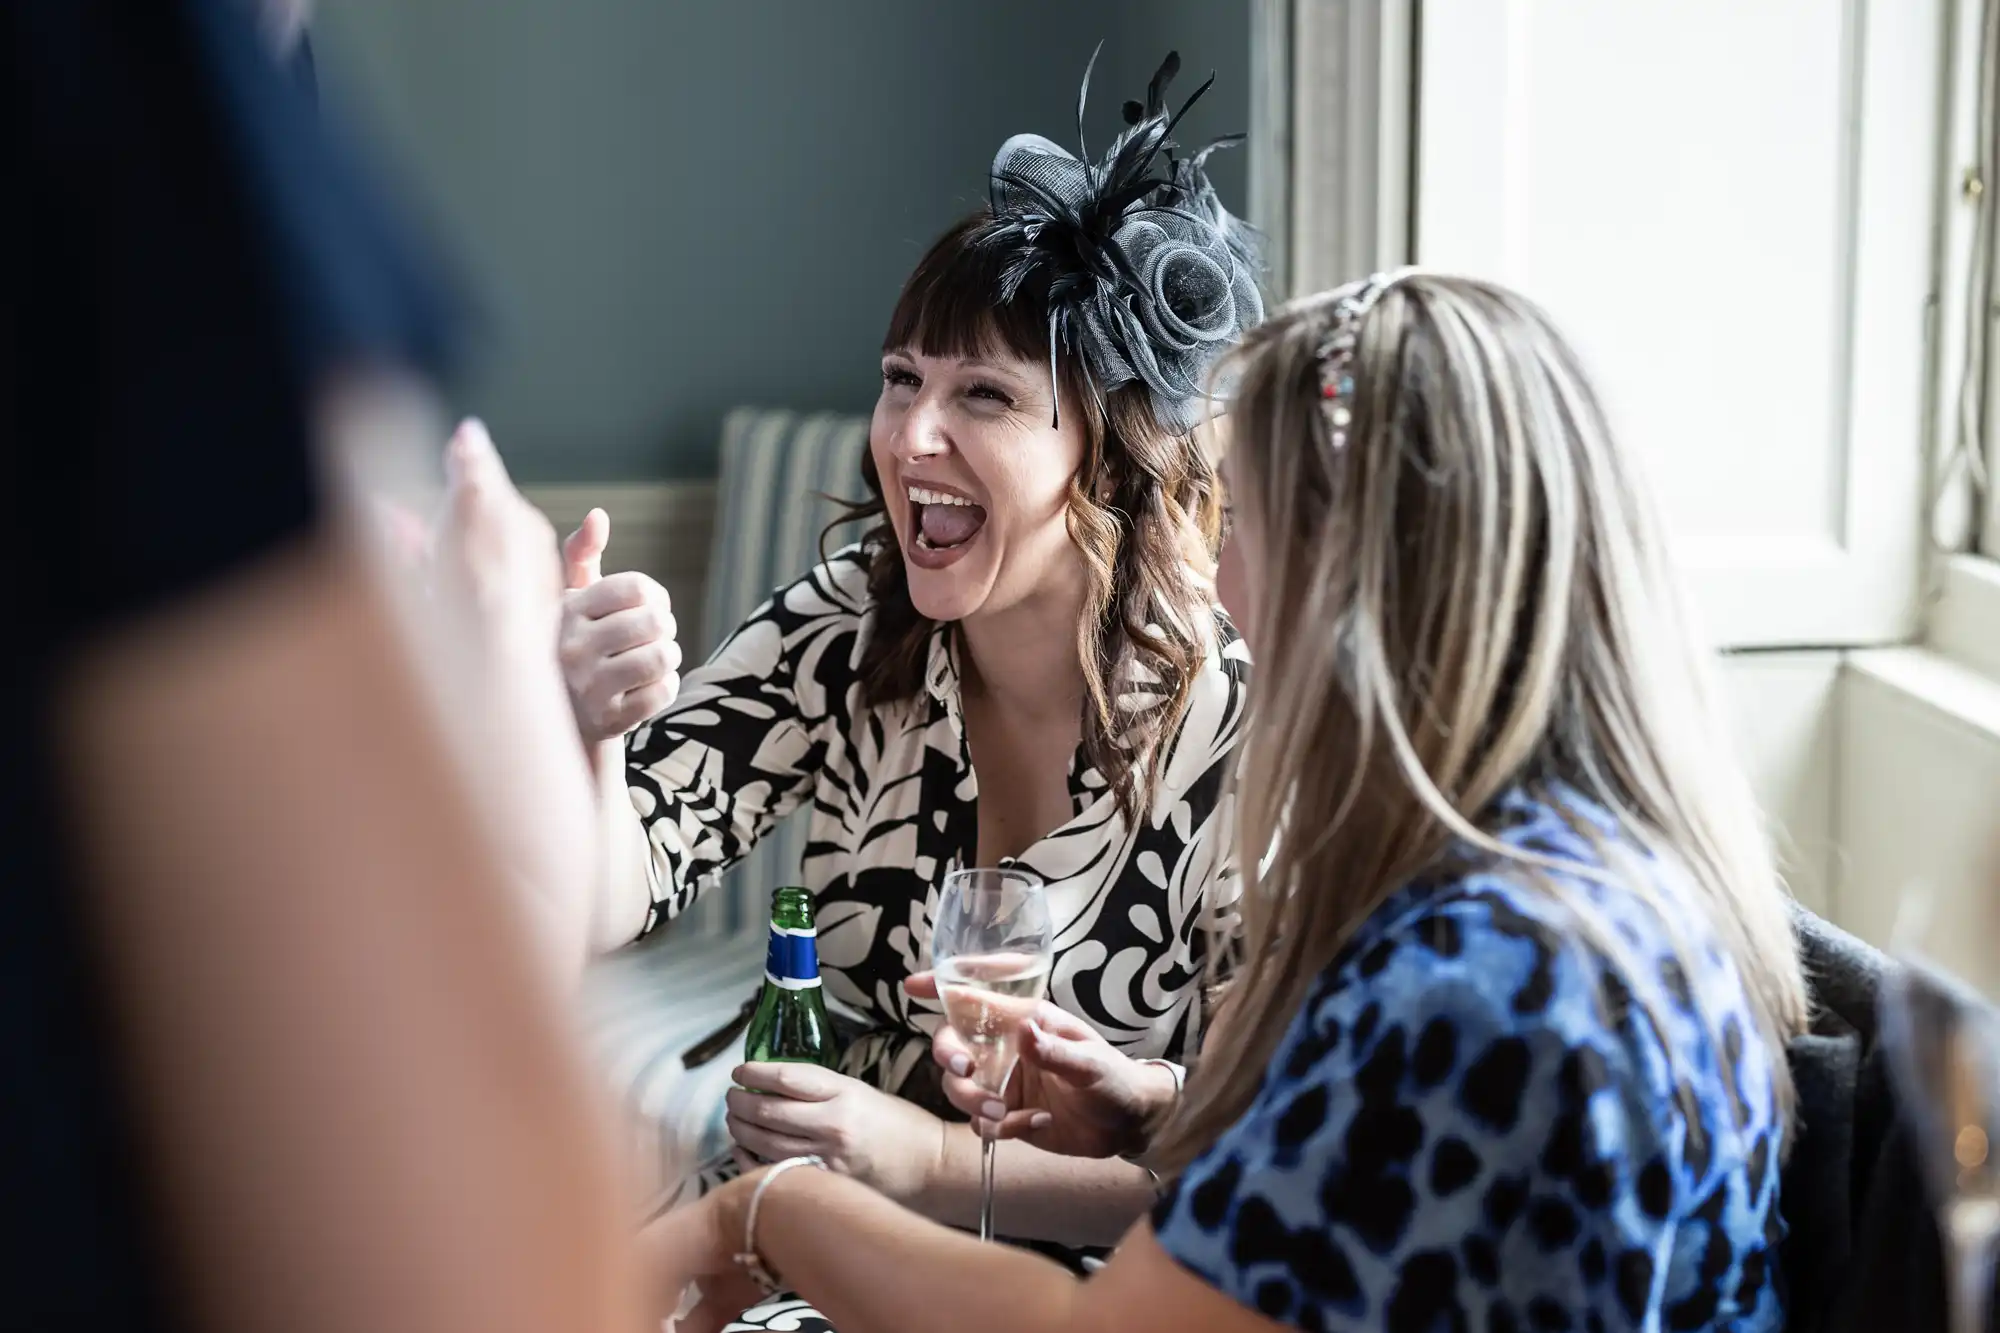 Two women conversing at a social event; one wearing a patterned dress and fascinator, giving a thumbs-up while laughing, the other woman holding a drink and wearing a blue patterned dress.